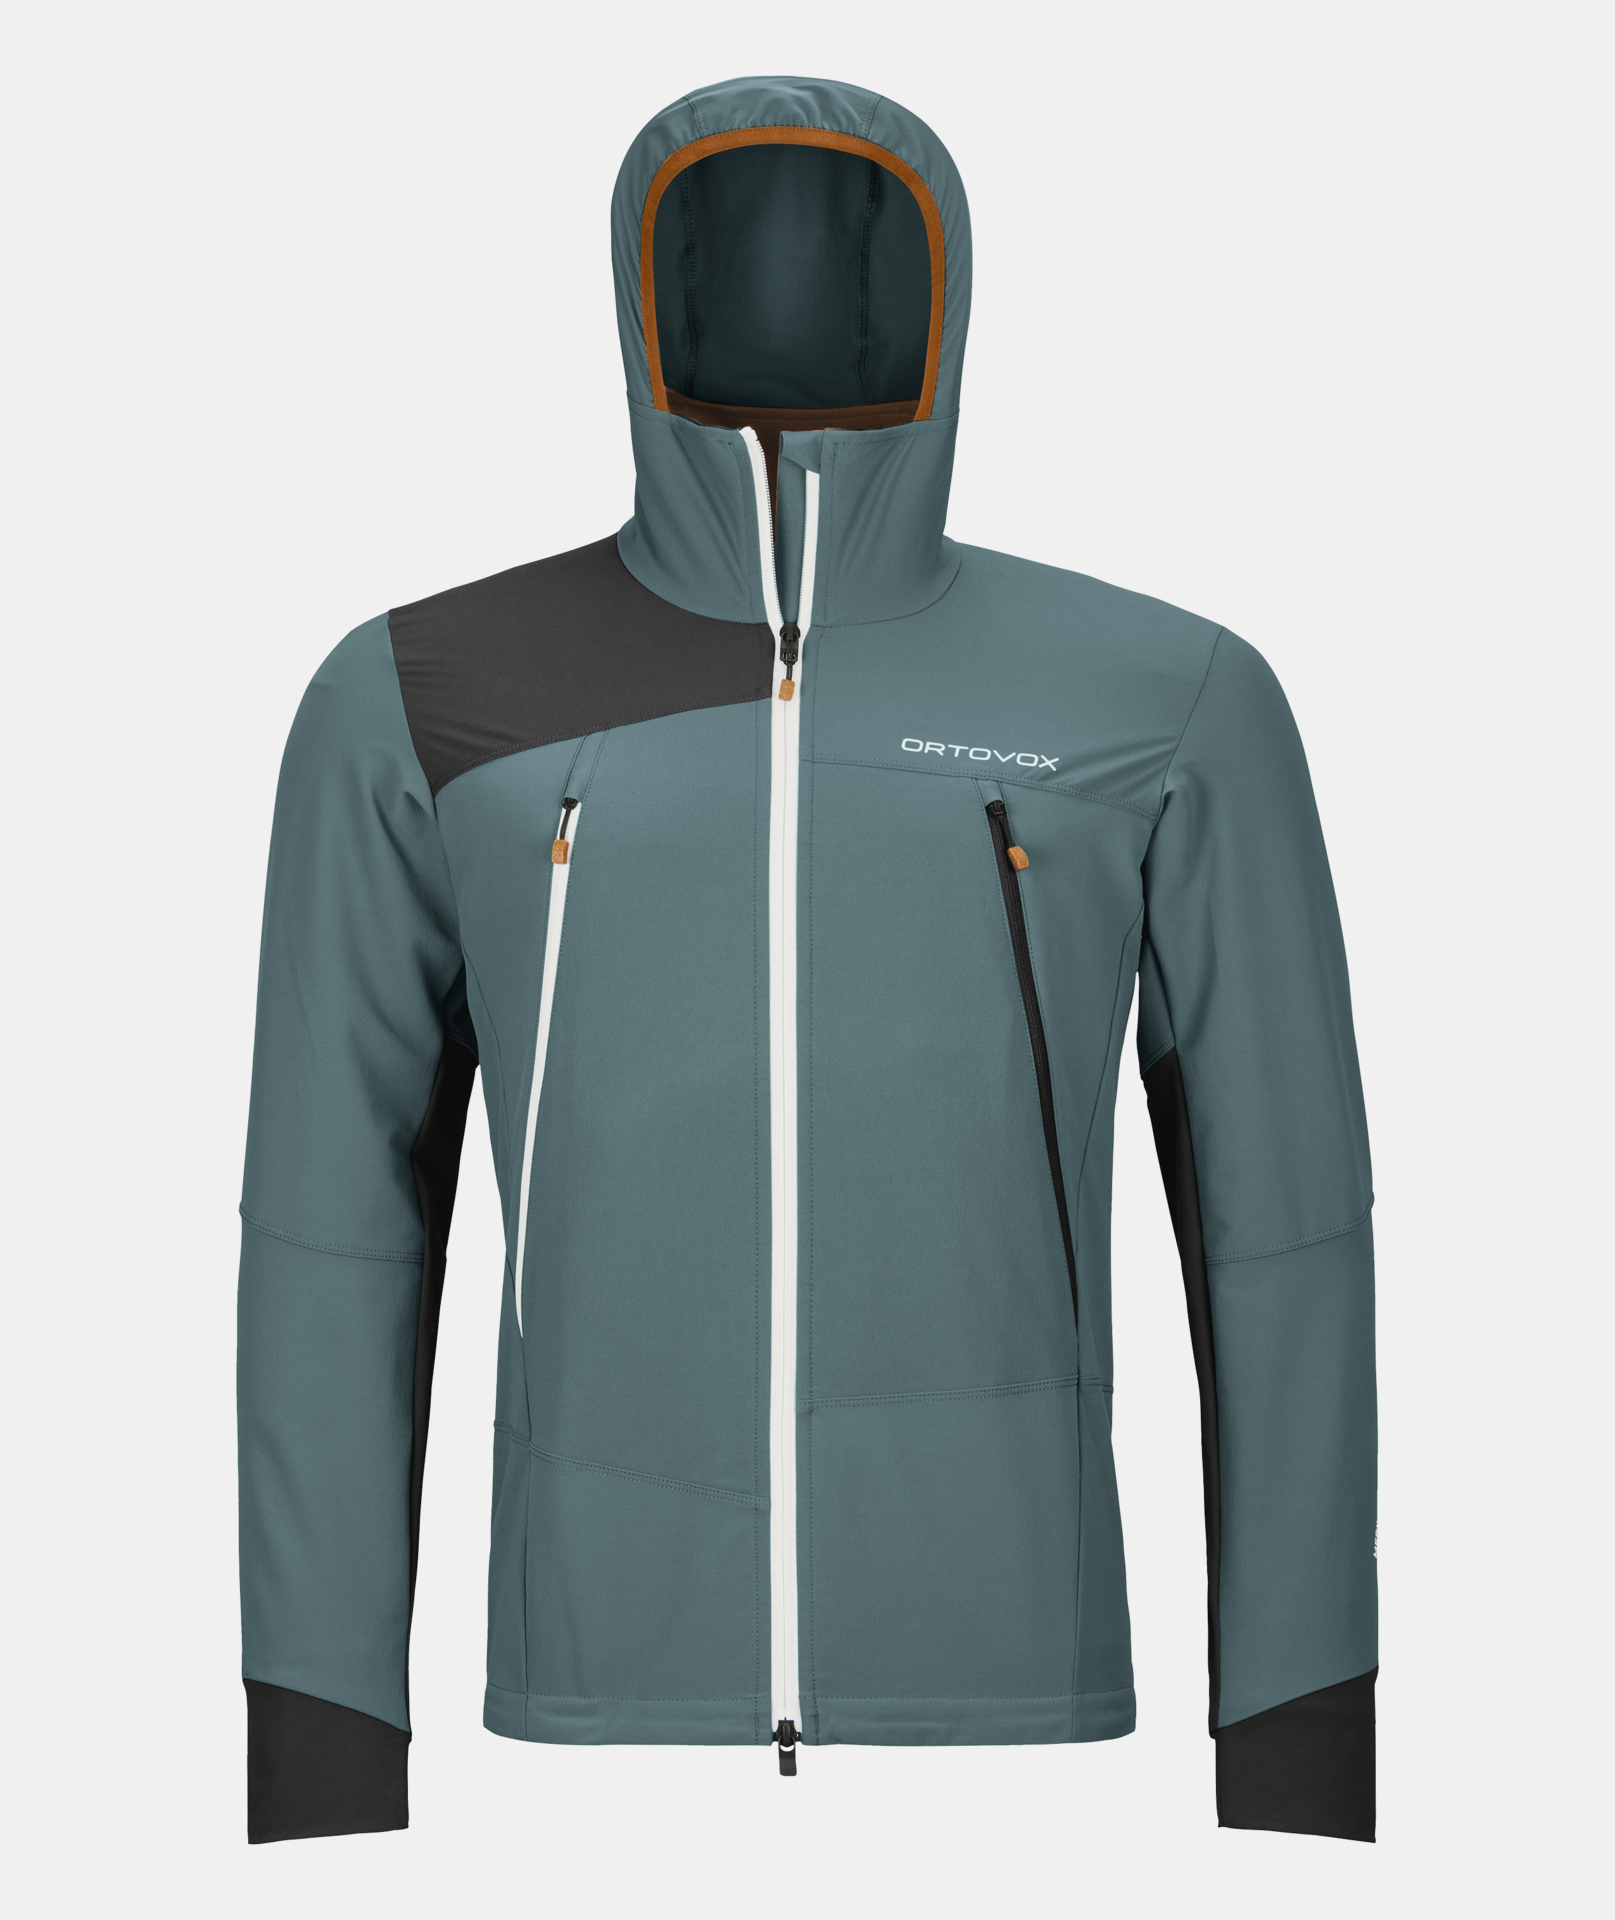 https://dxtb1rh8tbbvs.cloudfront.net/cache-buster-11710305454/ORTOVOX/mediaroom-product-archive/Men/Mountainwear/Jackets%20-%20Vests/Softshell%20Jackets/252834/image-thumb__252834__ortovox-lightbox-img_png/62176-87801-PALA_HOODED_JACKET_M_dark_arctic_grey-B-01.png